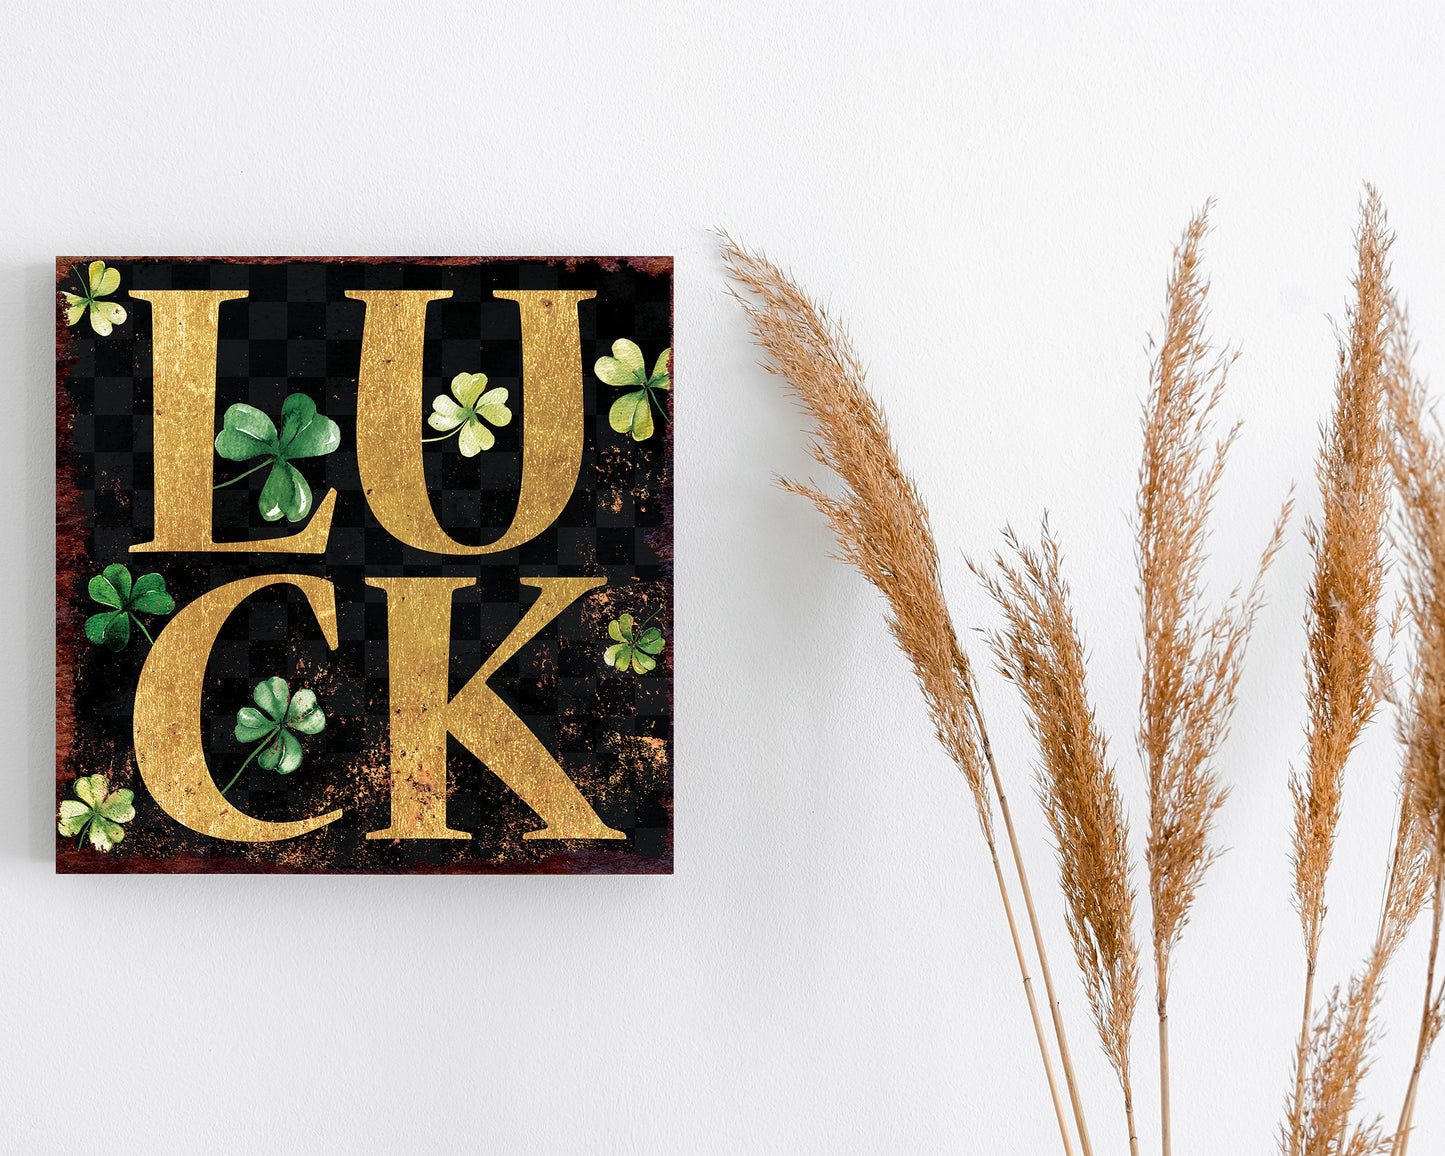 12in St. Patrick's Day Luck Clover Canvas Sign, Vintage Decor, Modern Farmhouse Mantel Entryway Decor, St.Patrick's Day Wall Decor